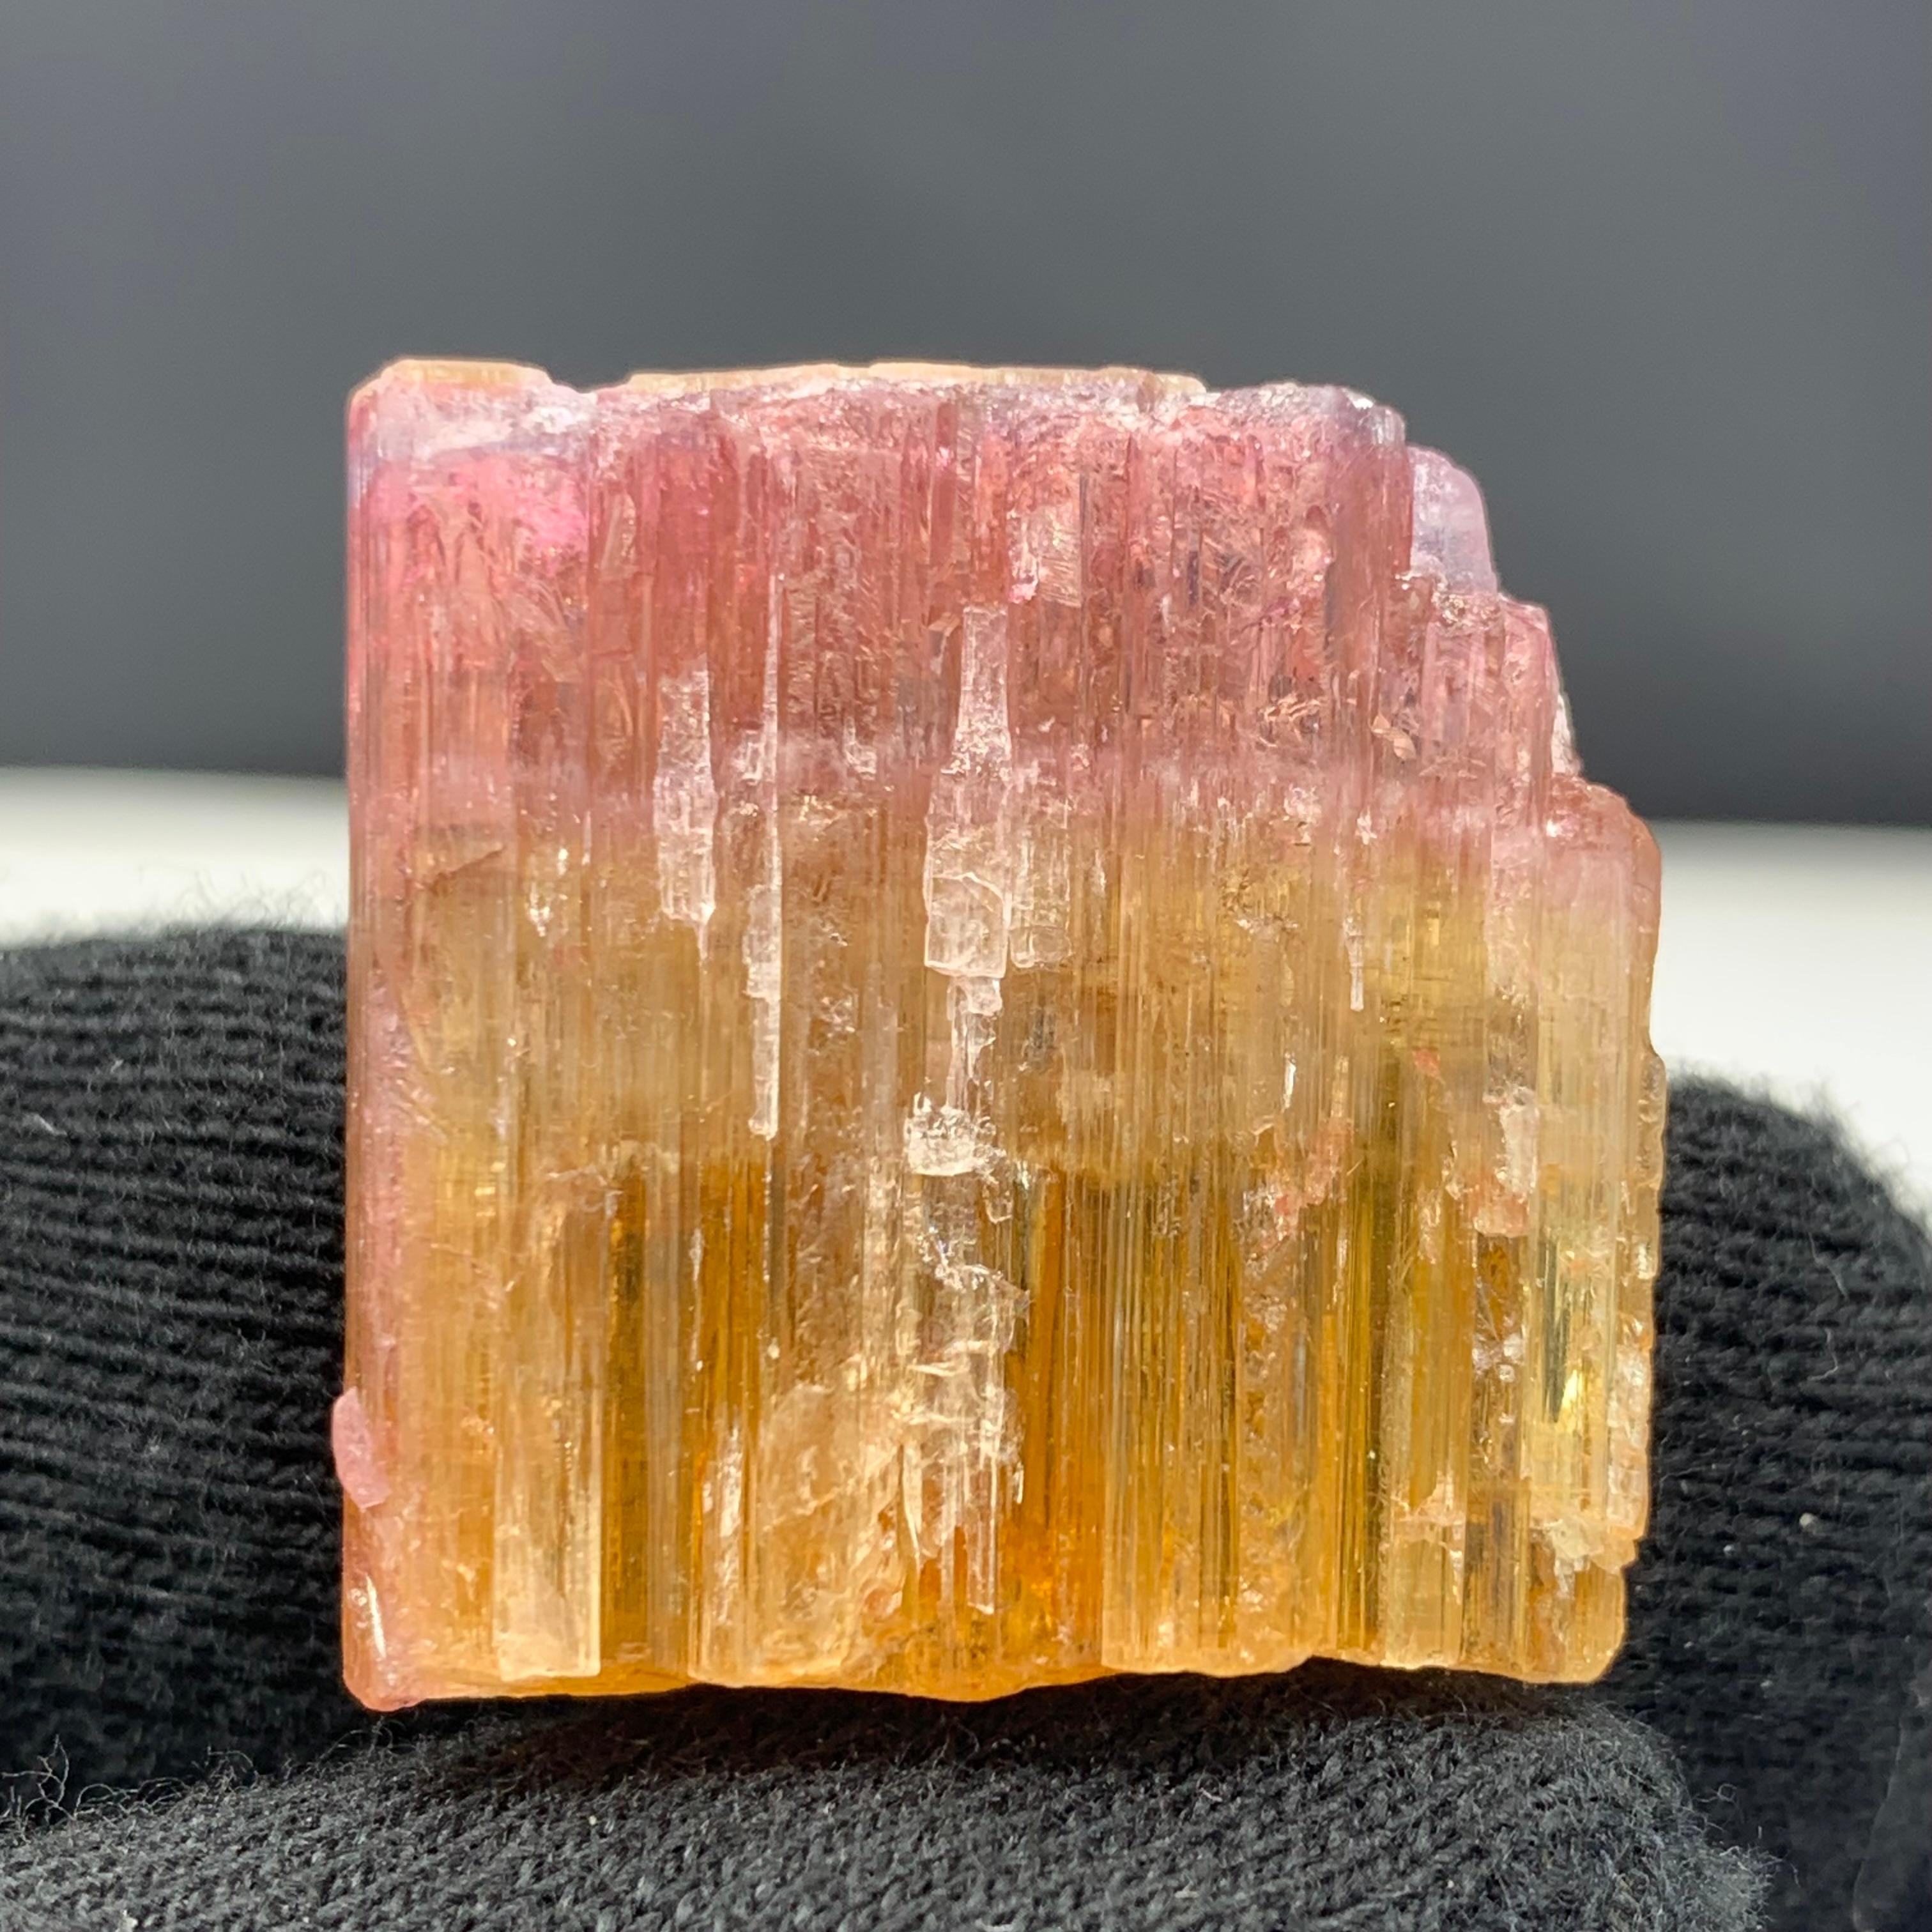 59.15 Carat Beautiful Bi Color Tourmaline Crystal From Paprook Mine, Afghanistan

Weight: 59.15 Carat 
Dimension: 2.6 x 2.6 x 0.9 Cm
Origin : Paprook Mine, Afghanistan 
Color: Pink and Orange 

Tourmaline is a crystalline silicate mineral group in